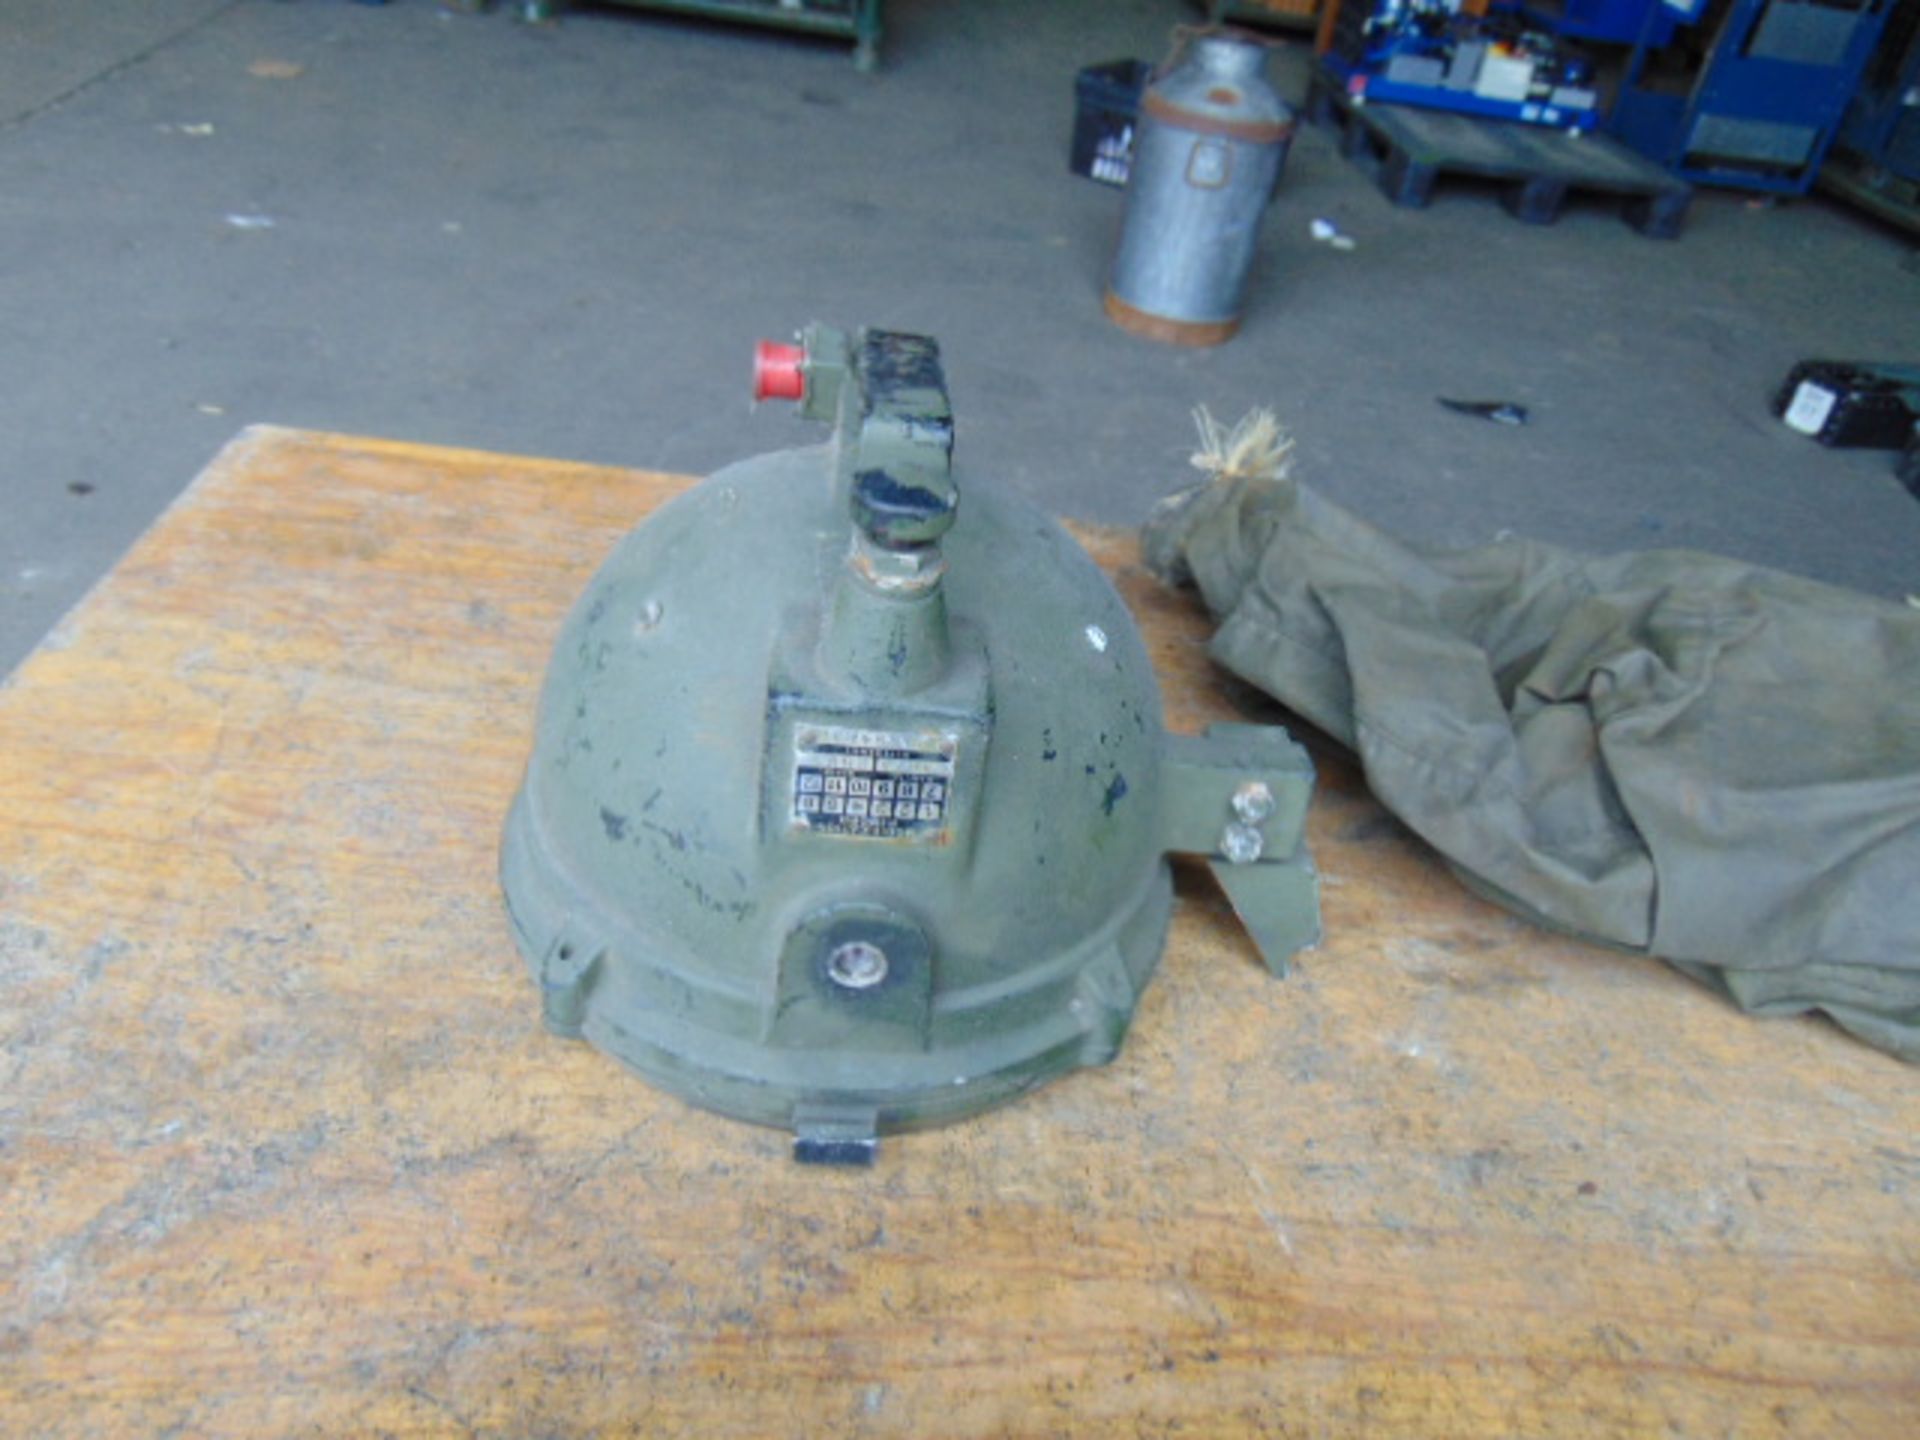 FV Heavy Duty Vehicle Mounted Search Light with cover - Image 7 of 8